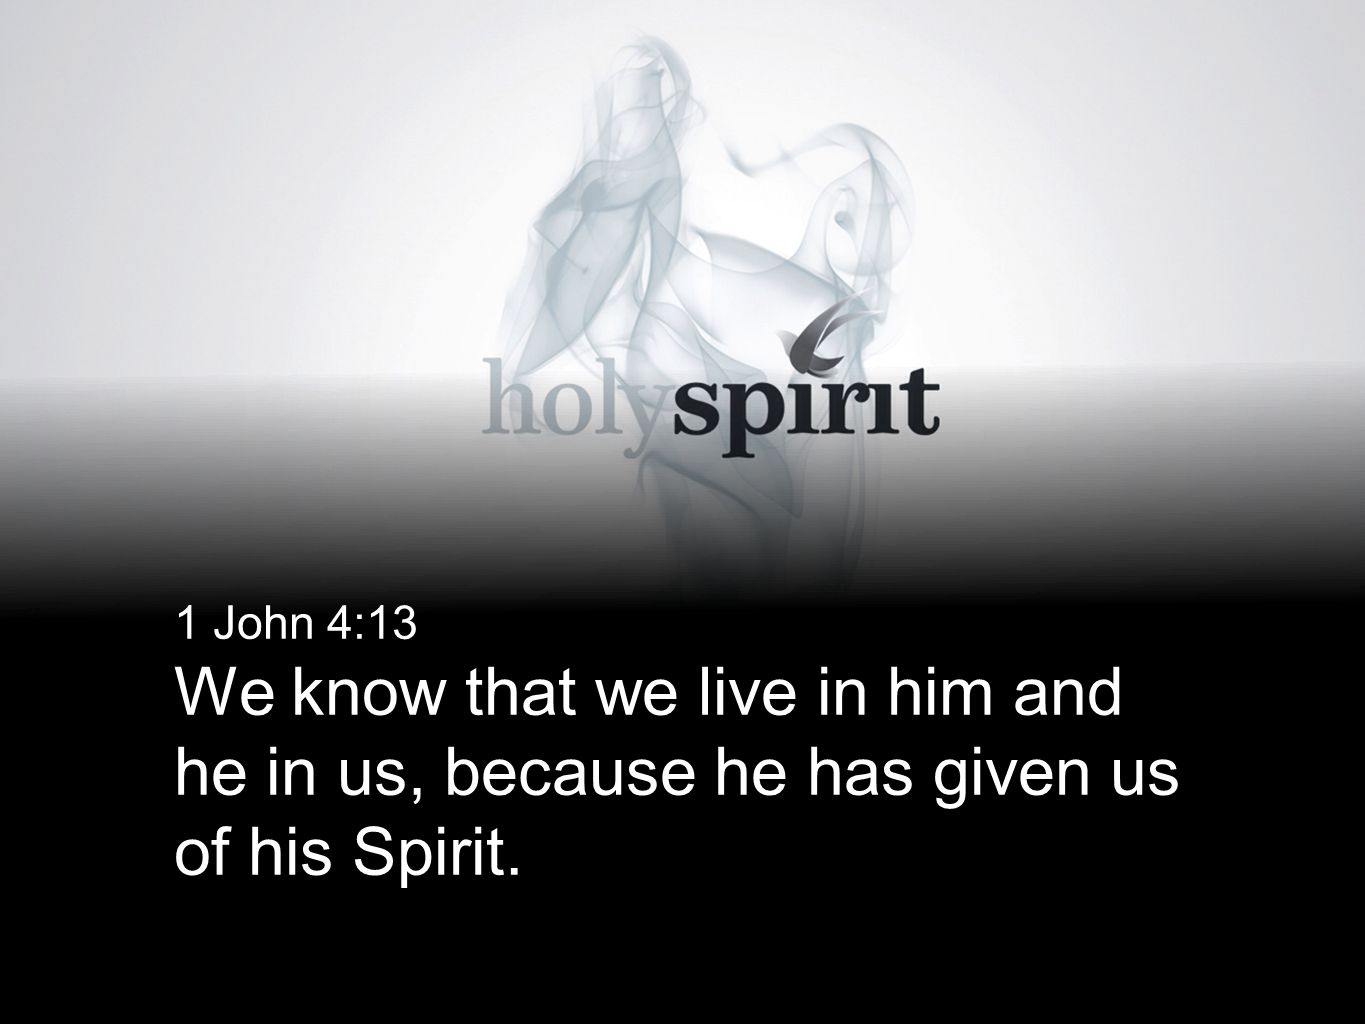 1 John 4:13 We know that we live in him and he in us, because he has given us of his Spirit.